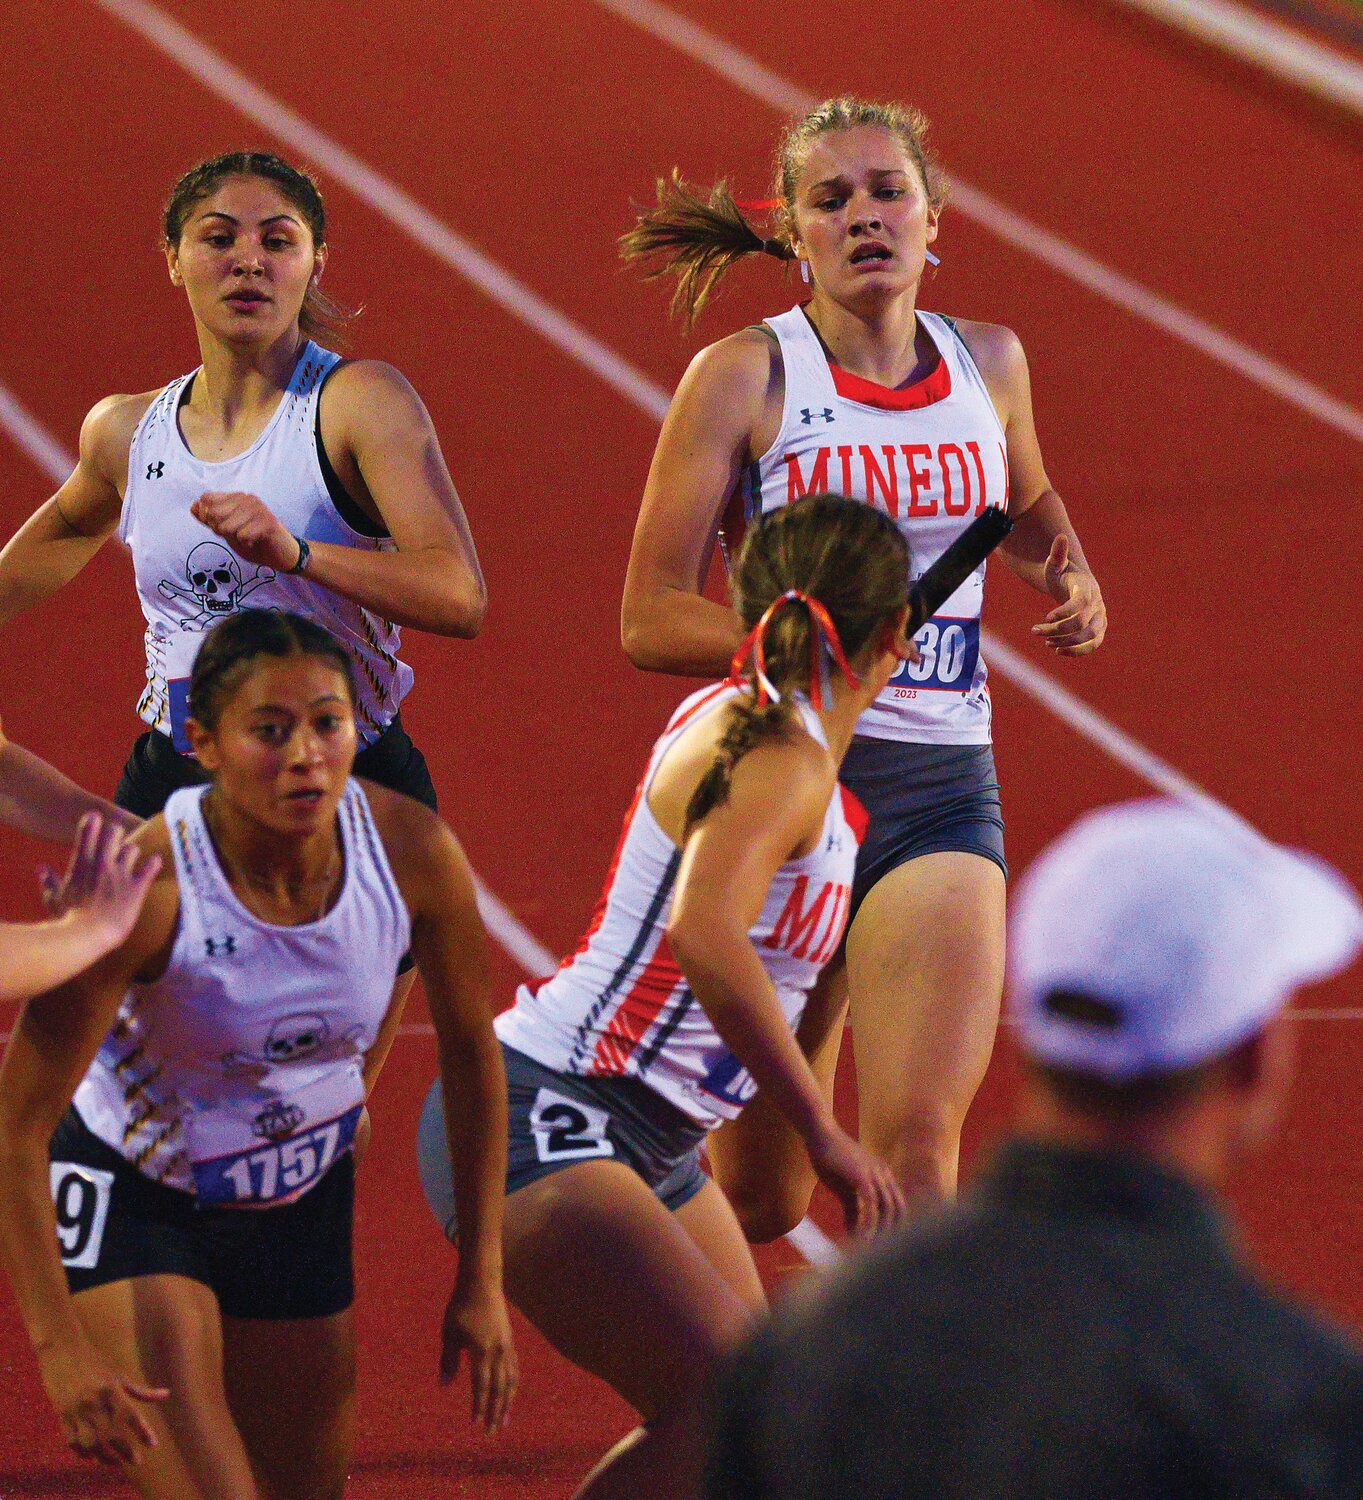 Tanner Hartzog approaches Carmen Carrasco for the final leg of the 1,600-meter relay. [view more relay running]